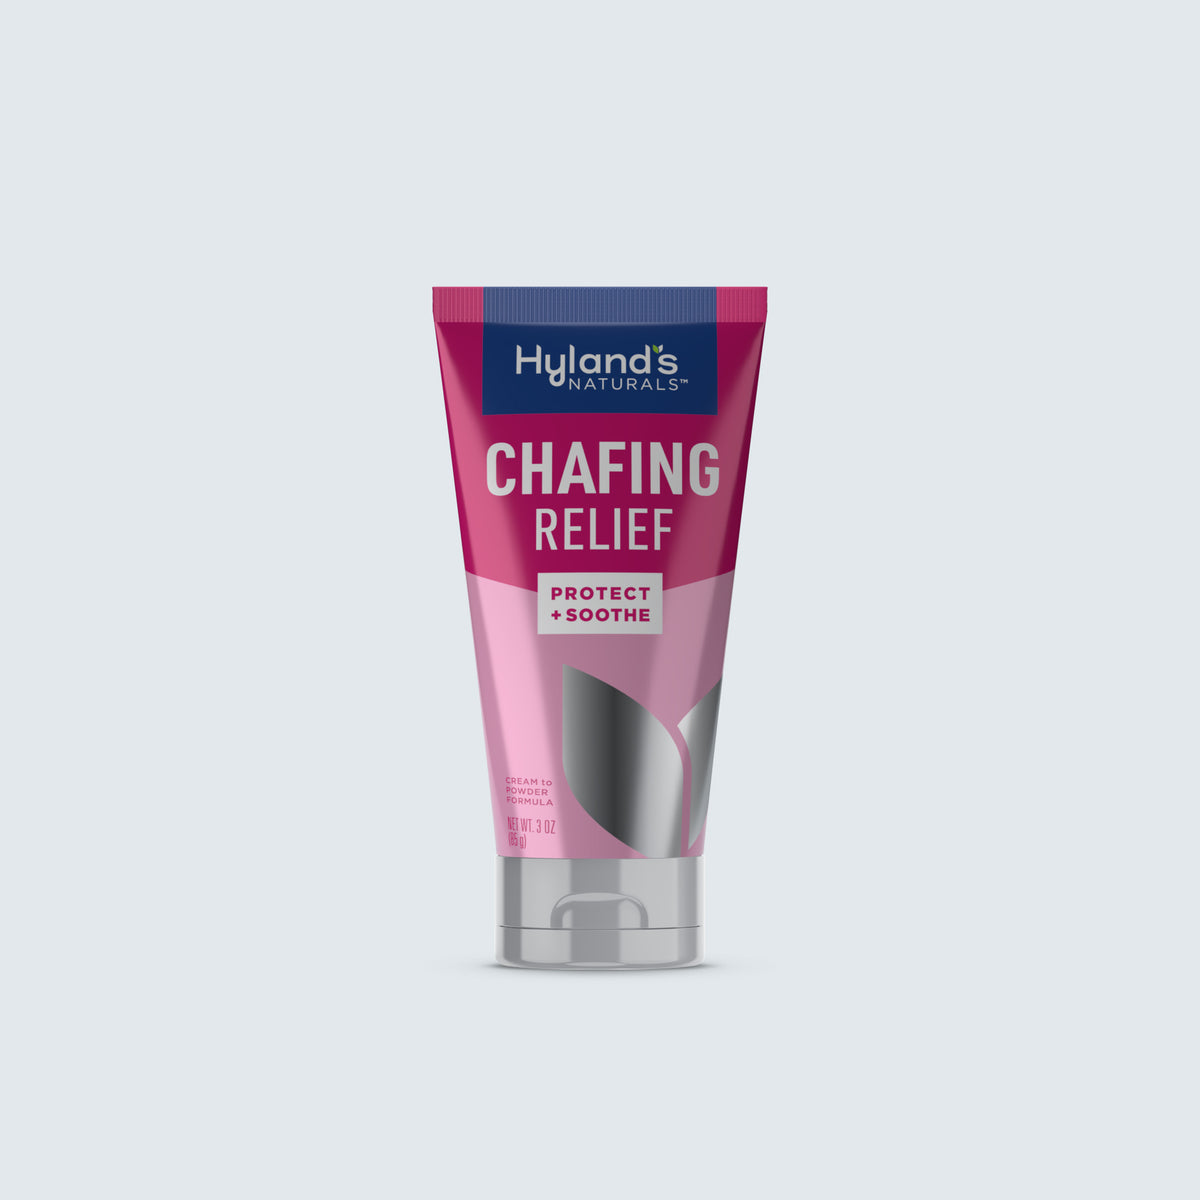 Chafing Relief container.